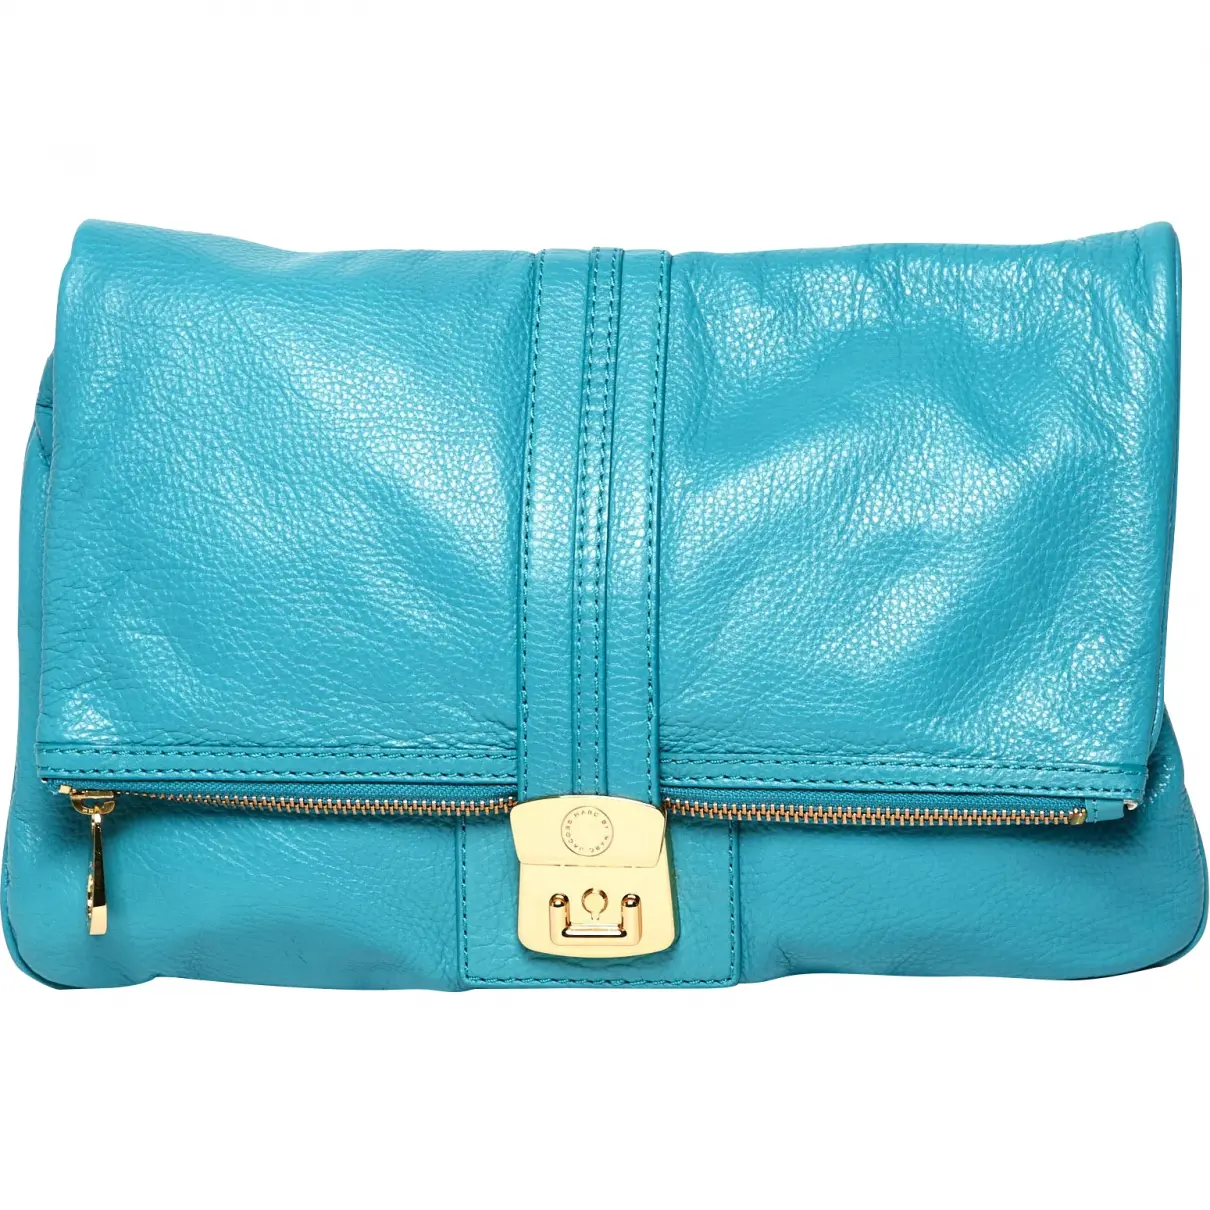 LEATHER CLUTCH PURSE Marc by Marc Jacobs